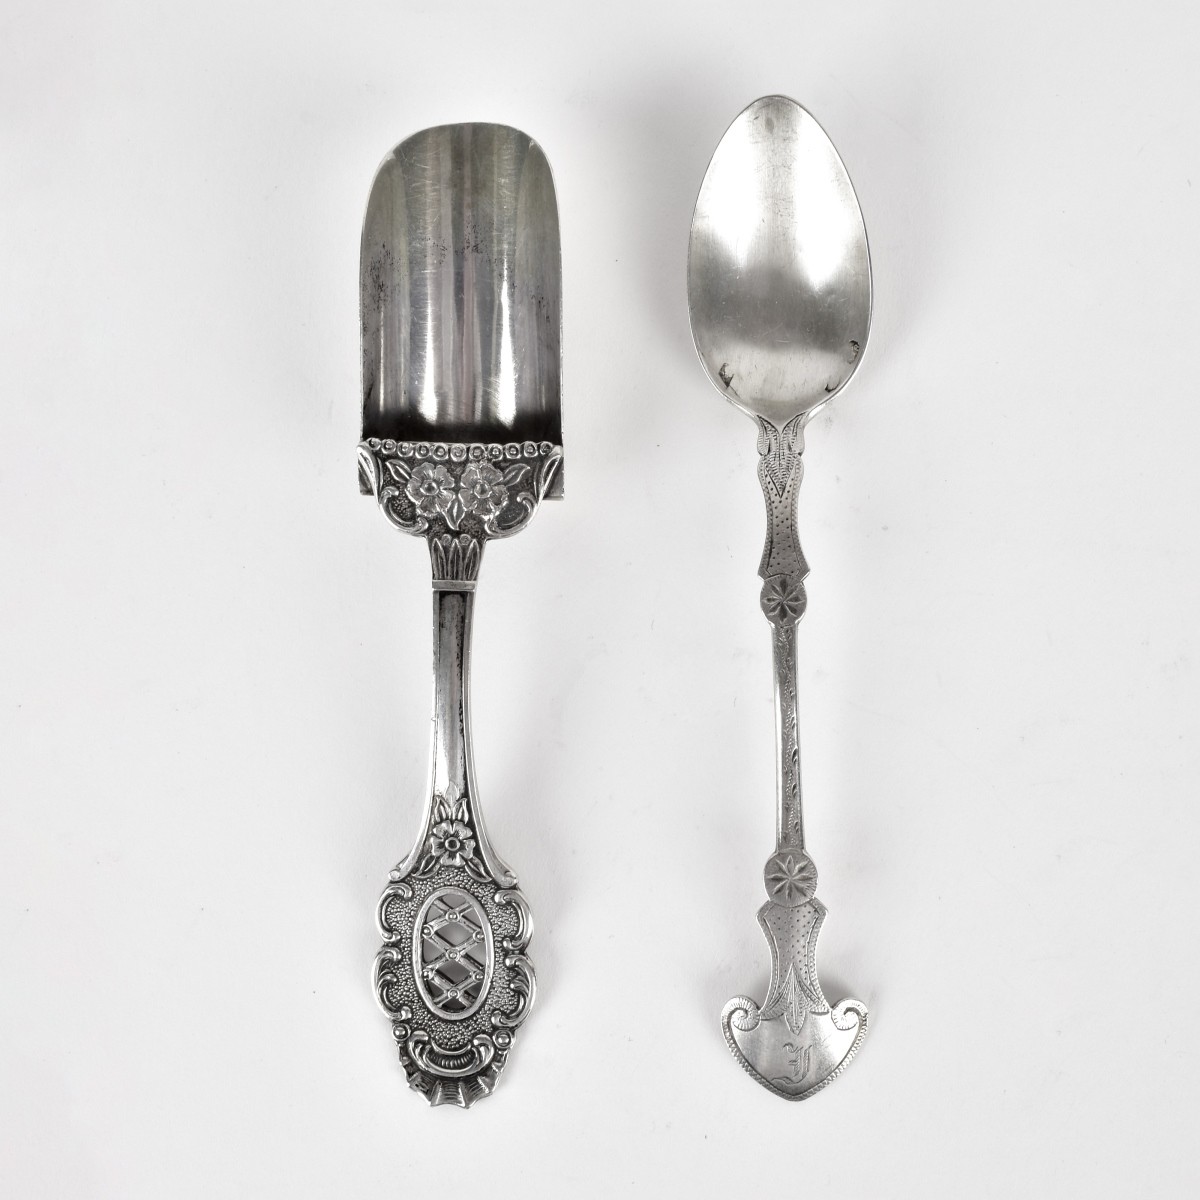 European Silver Assorted Items